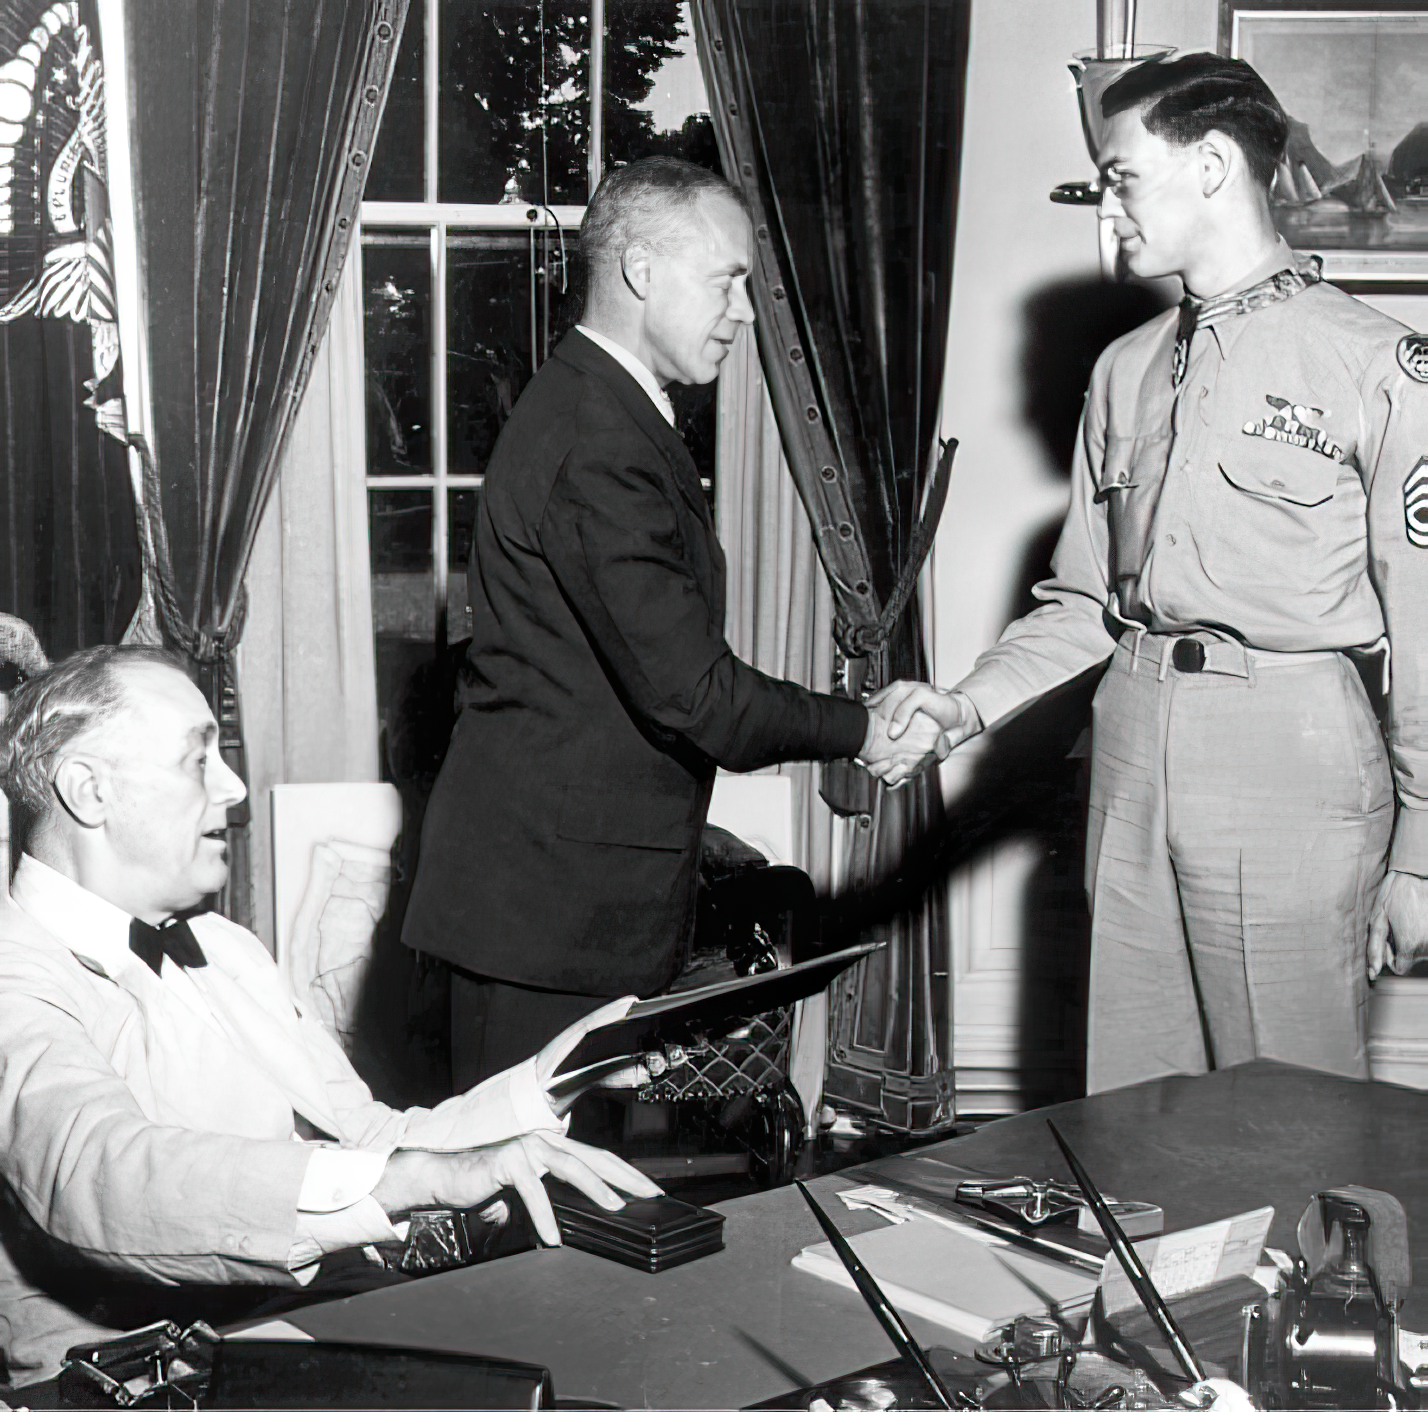 Technical Sergeant Forrest L. Vosler, a B-17 Flying Fortress radio operator, was the second enlisted airman to earn the Medal of Honor. He is seen here receiving the award from Franklin Delano Roosevelt